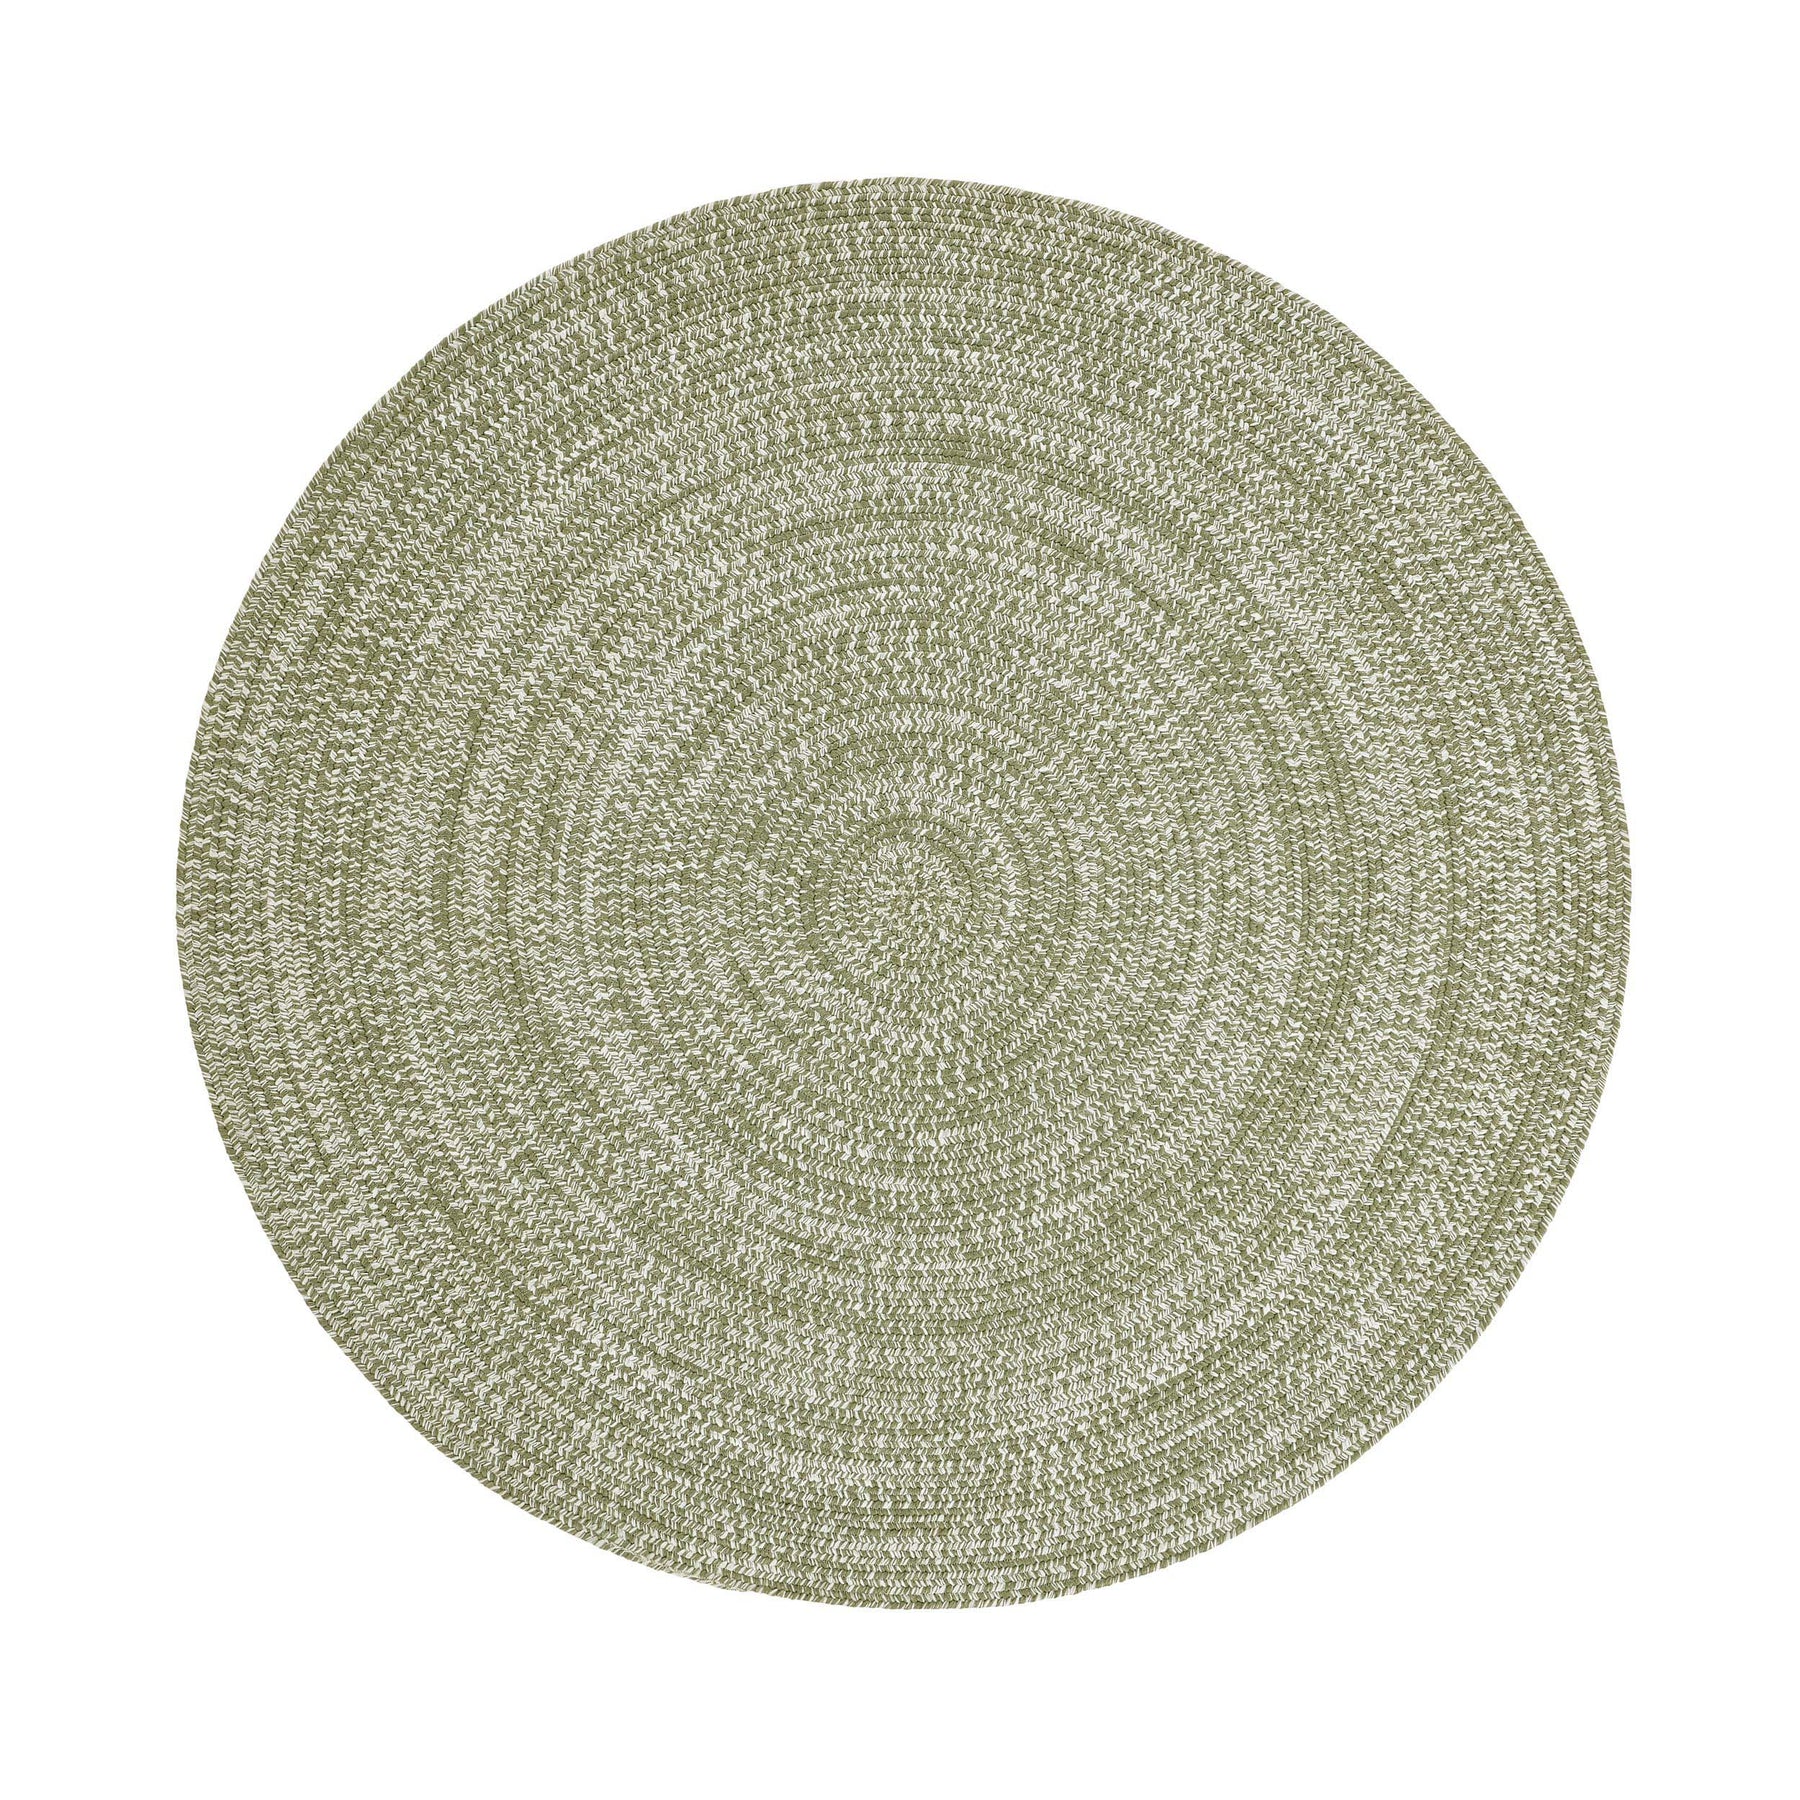 Polly Round Rug, Braided Rugs